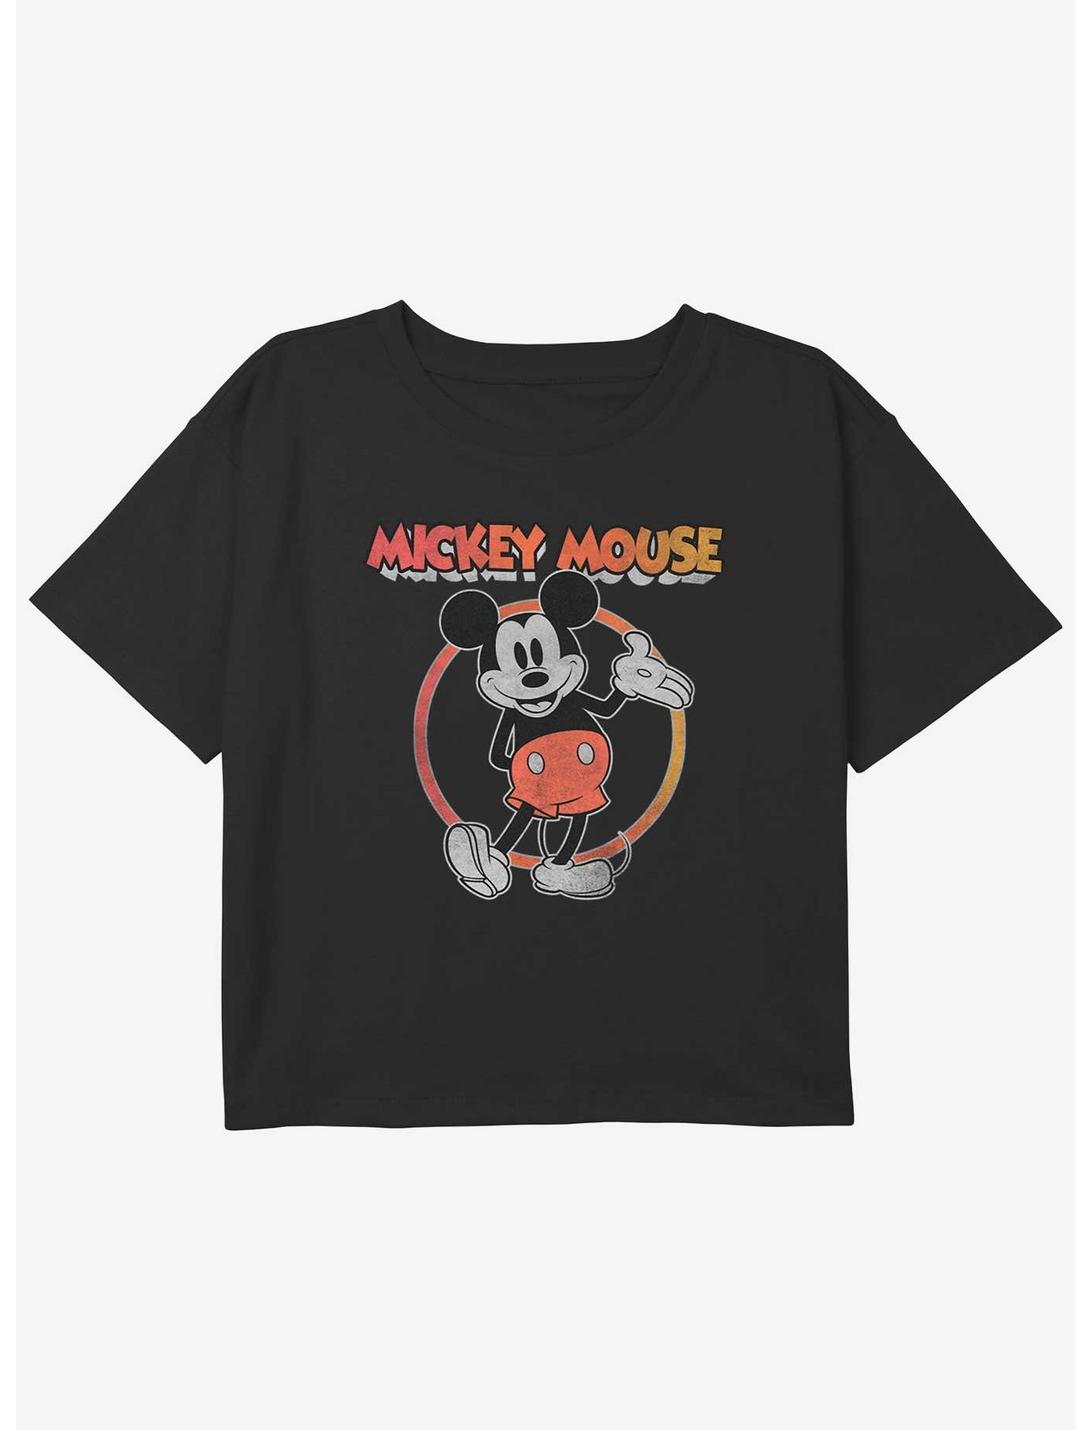 Disney Mickey Mouse Mickey 1995 Girls Youth Crop T-Shirt, BLACK, hi-res